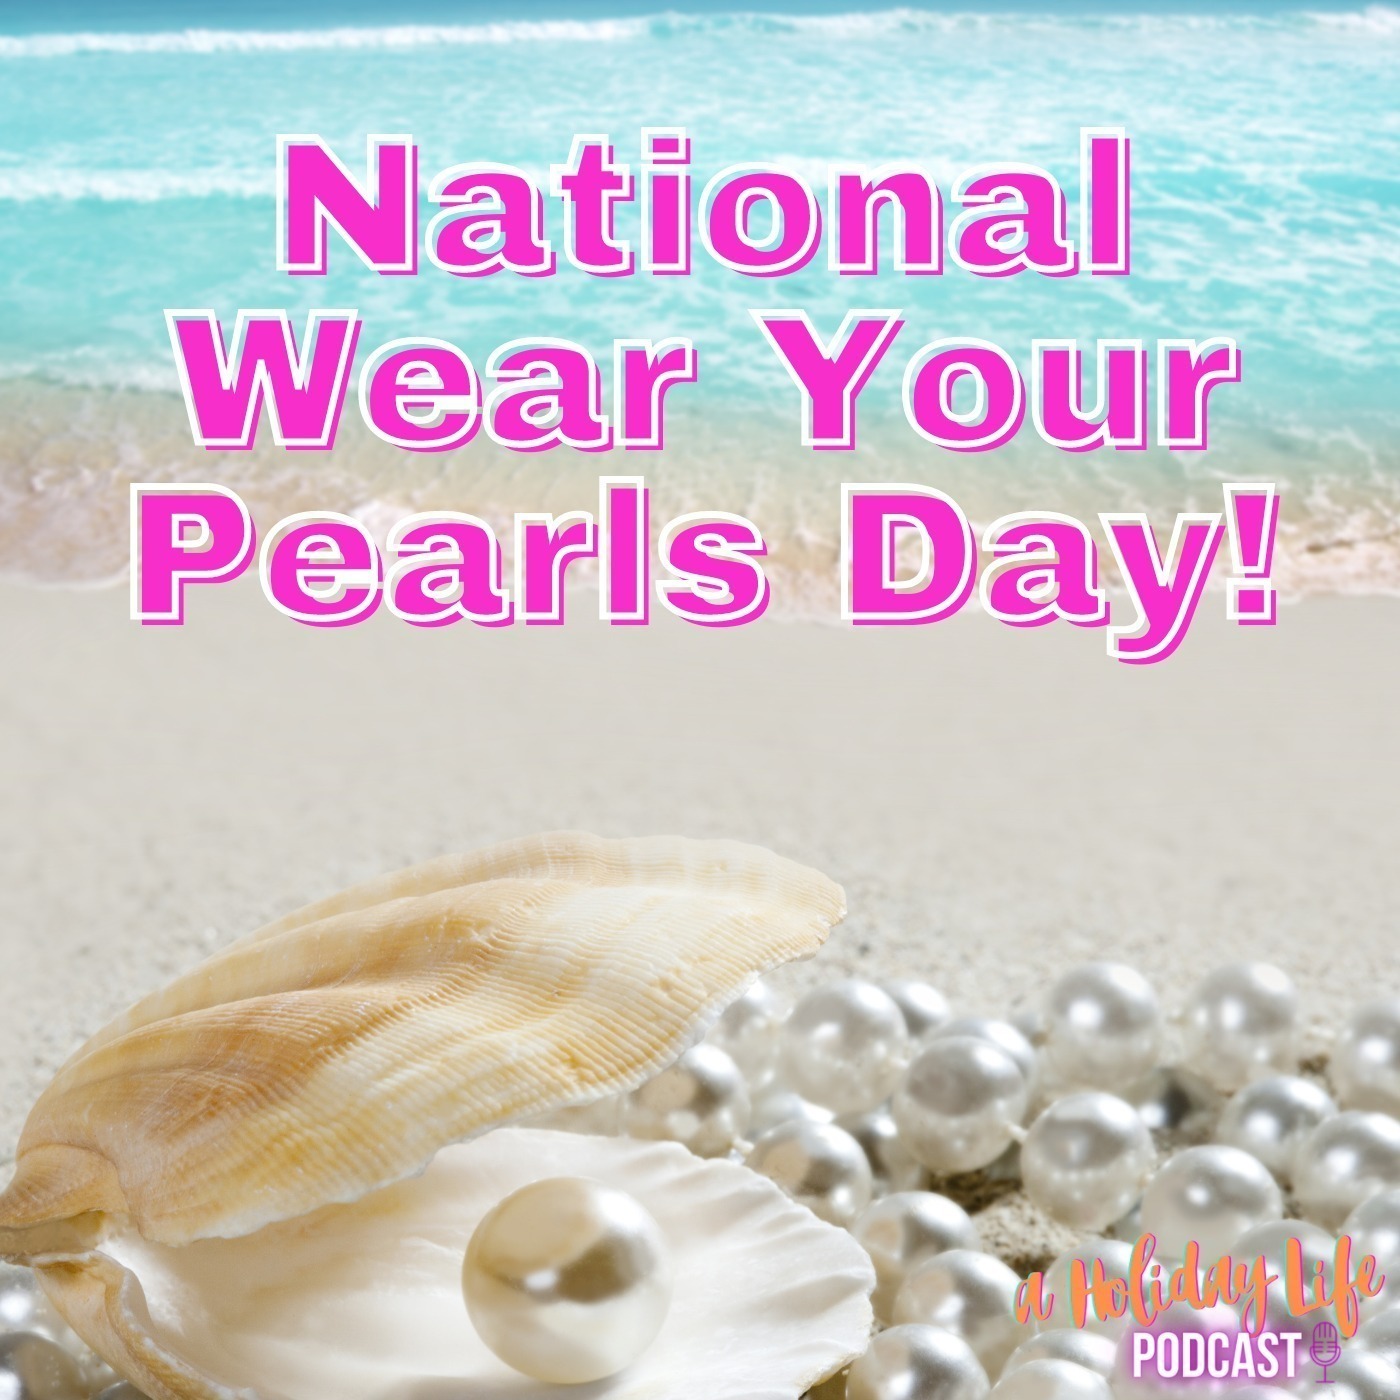 Episode #47 National Wear Your Pearls Day Image